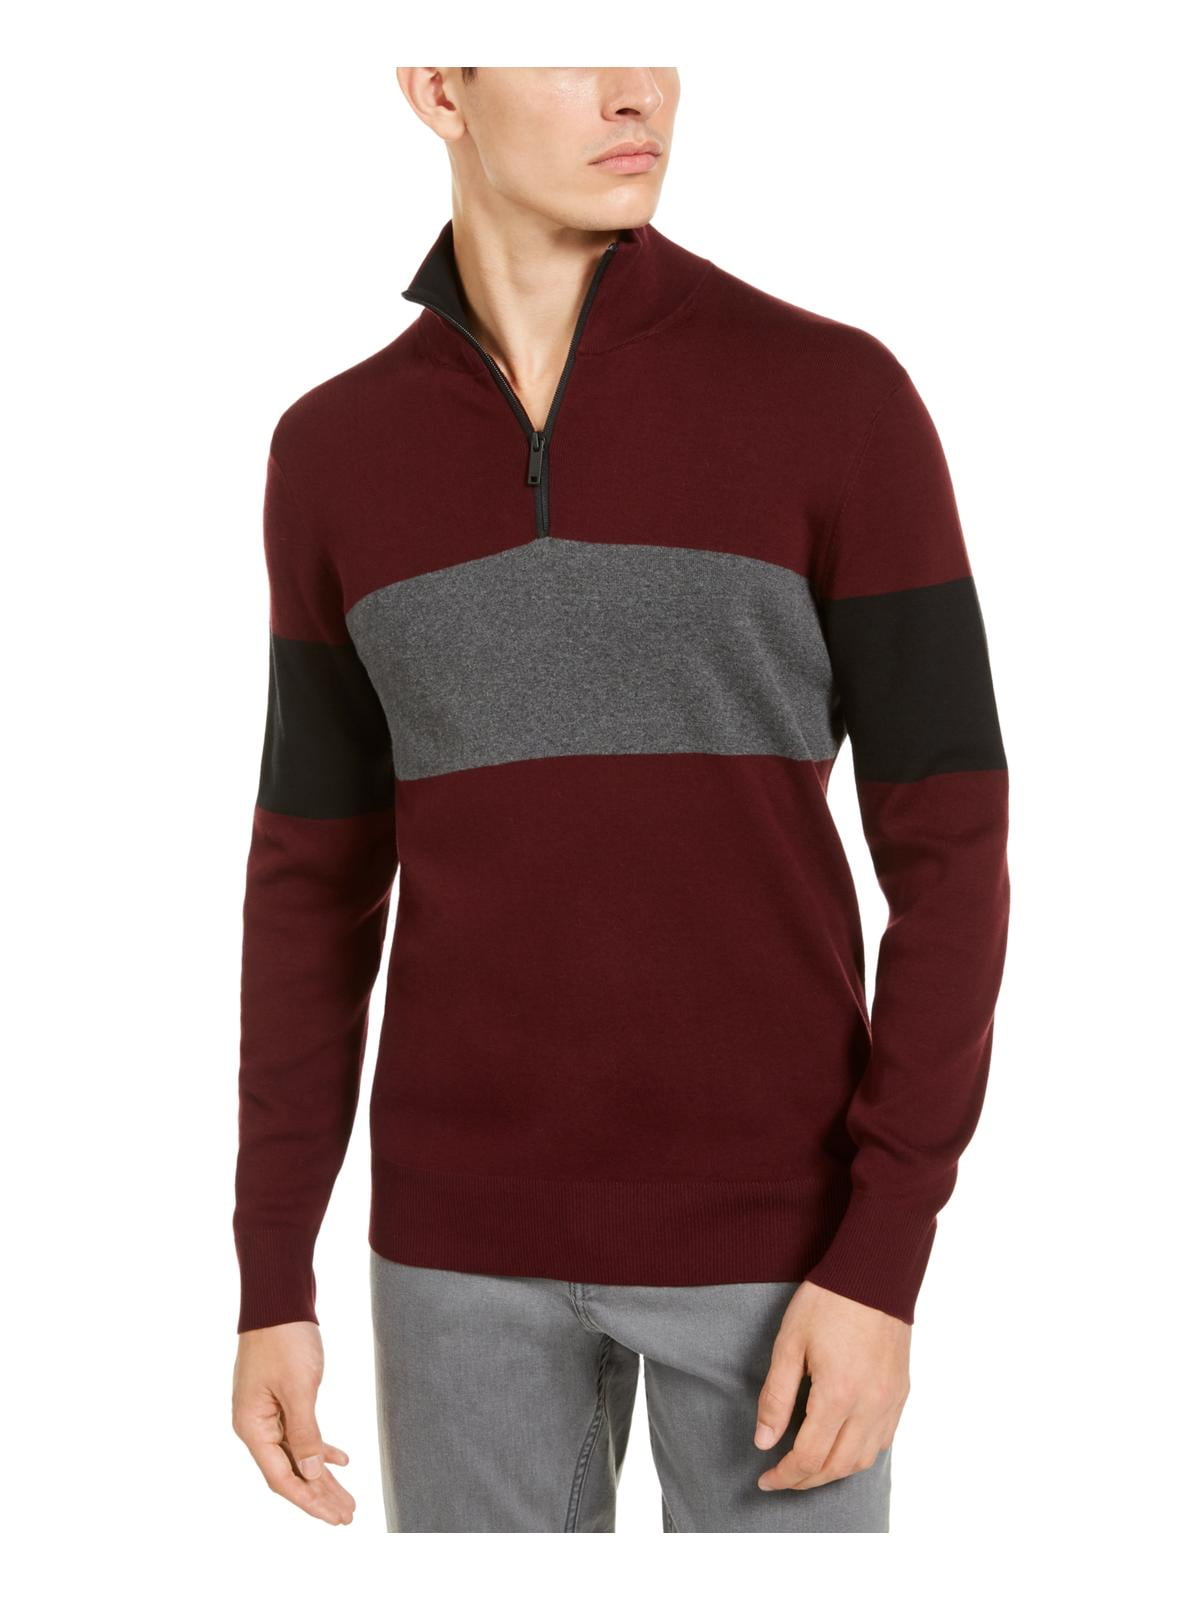 DKNY Mens 1/4 Pullover Sweater Red S Walmart.com